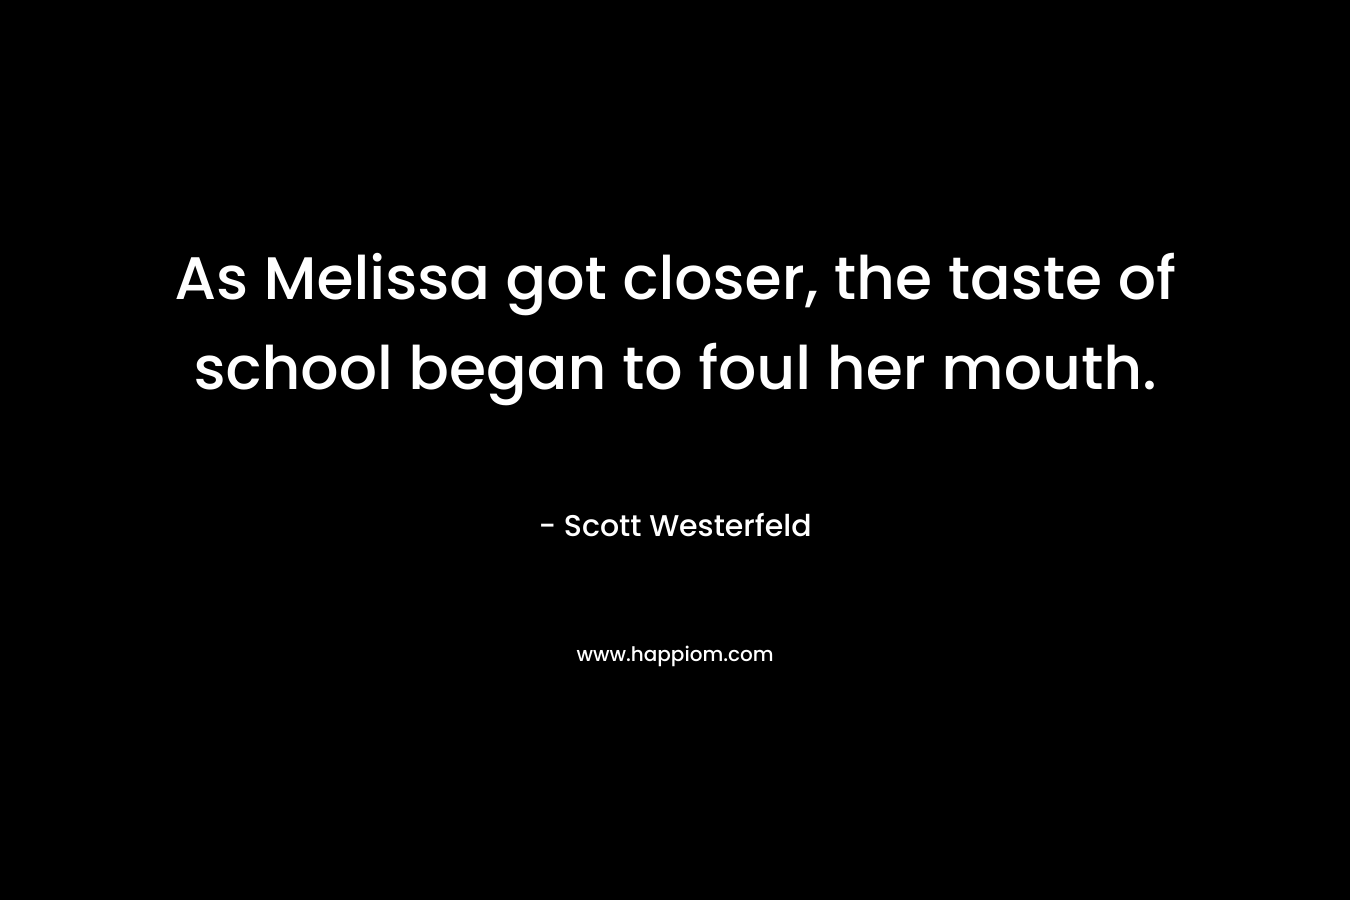 As Melissa got closer, the taste of school began to foul her mouth.